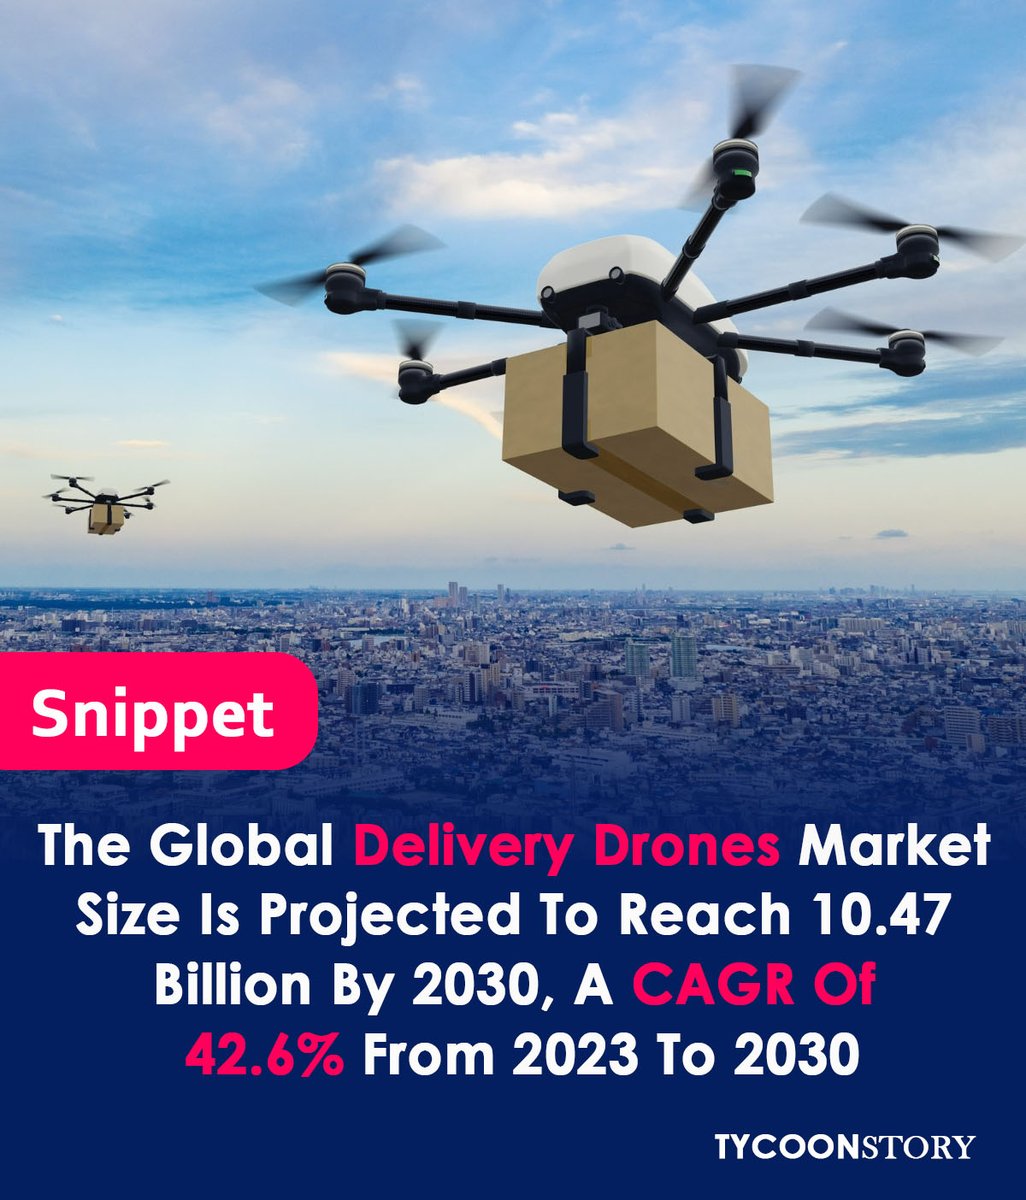 The global delivery drones market size is expected to reach $10.47 billion by 2030, growing at a CAGR of 42.6% from 2023 to 2030
#artificialintelligence #smartdrones #dronedelivery #airspace #dataservices #dronelogistics @Airbus @Boeing @DroneDeliveryCa @skycartdrones @Wingcopter